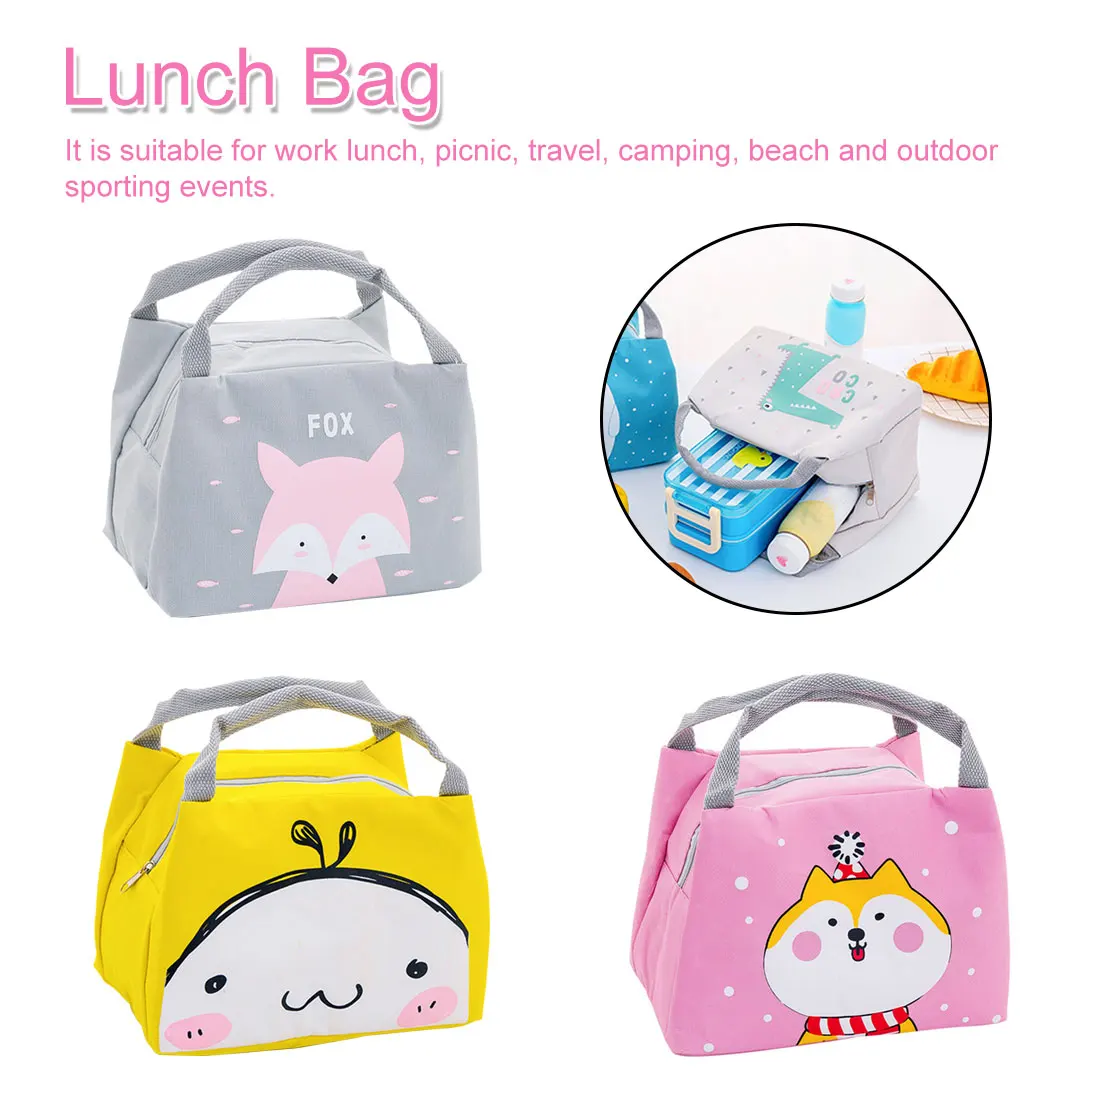 Adults Kids Lunchbag Insulation Bag Outdoor Picnic School Work Portable Lunchbox